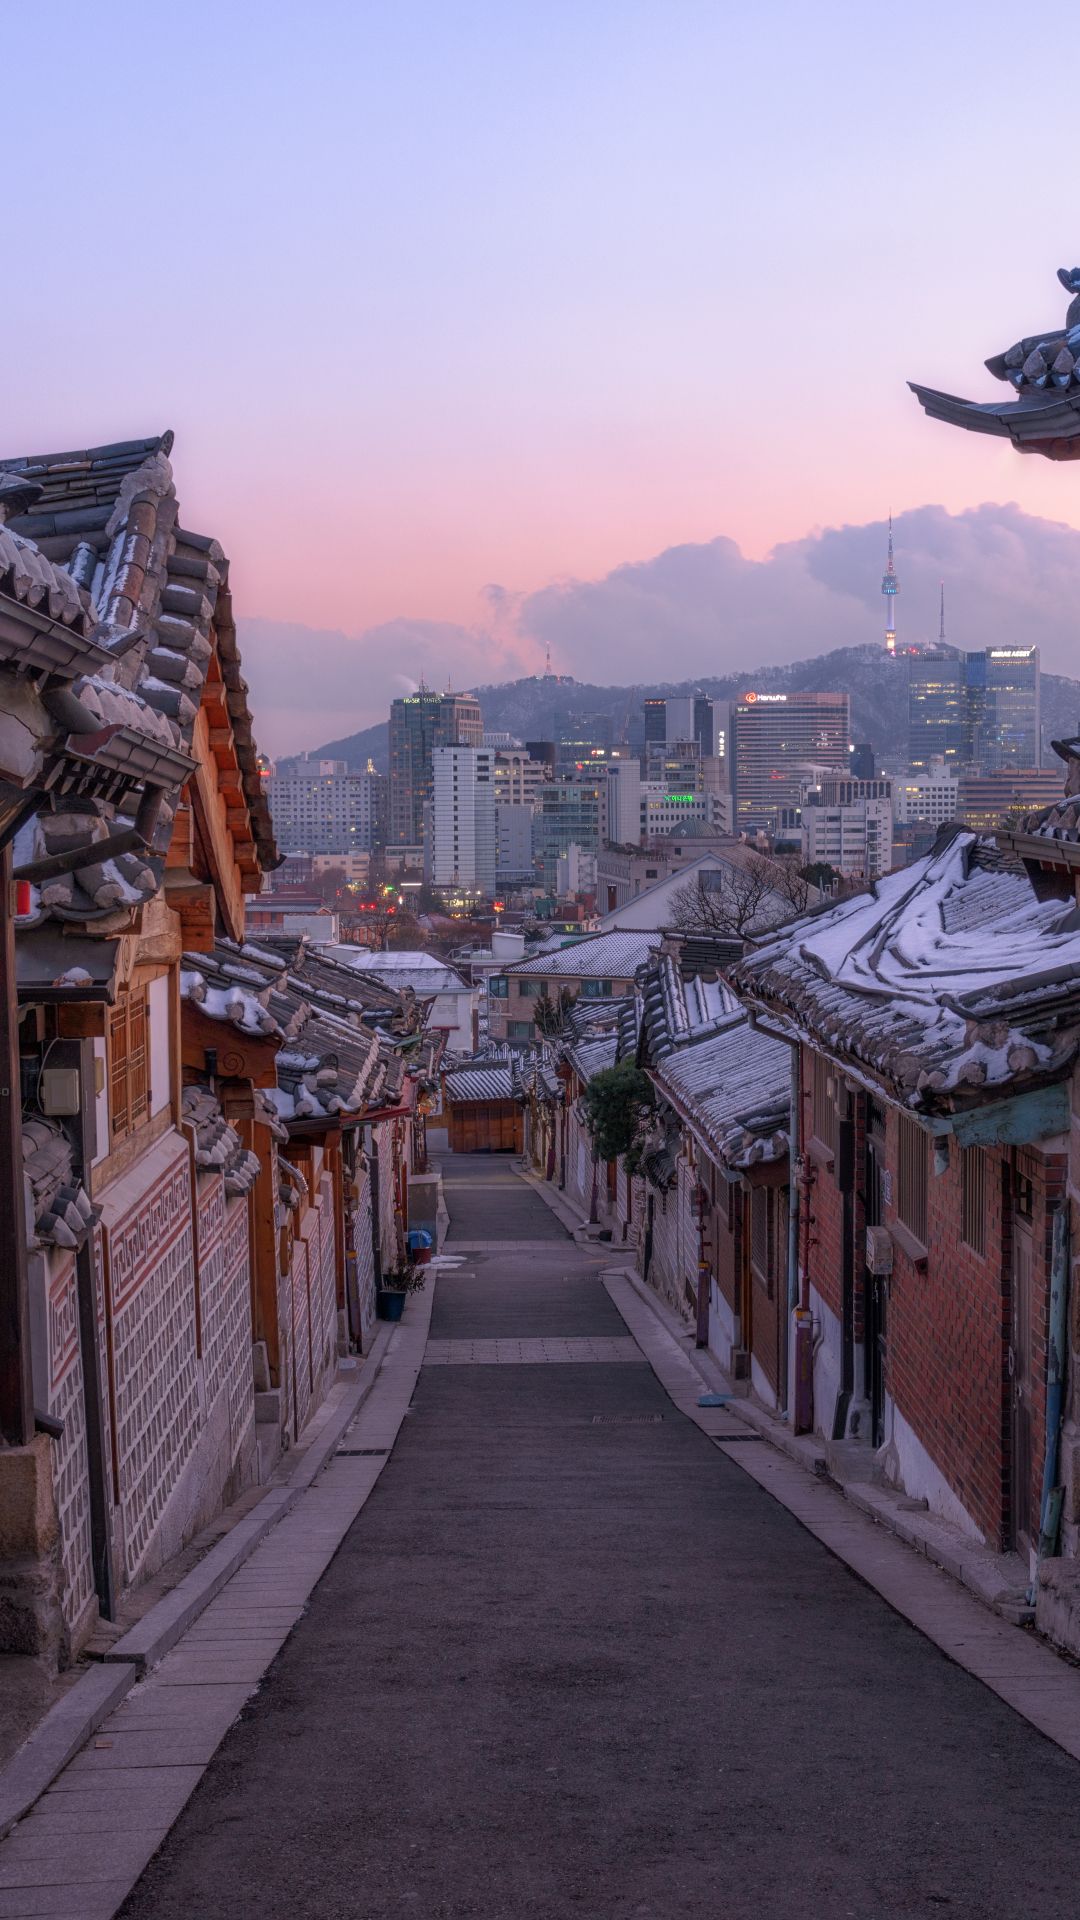 A street with buildings and snow on the ground - Seoul, Korean